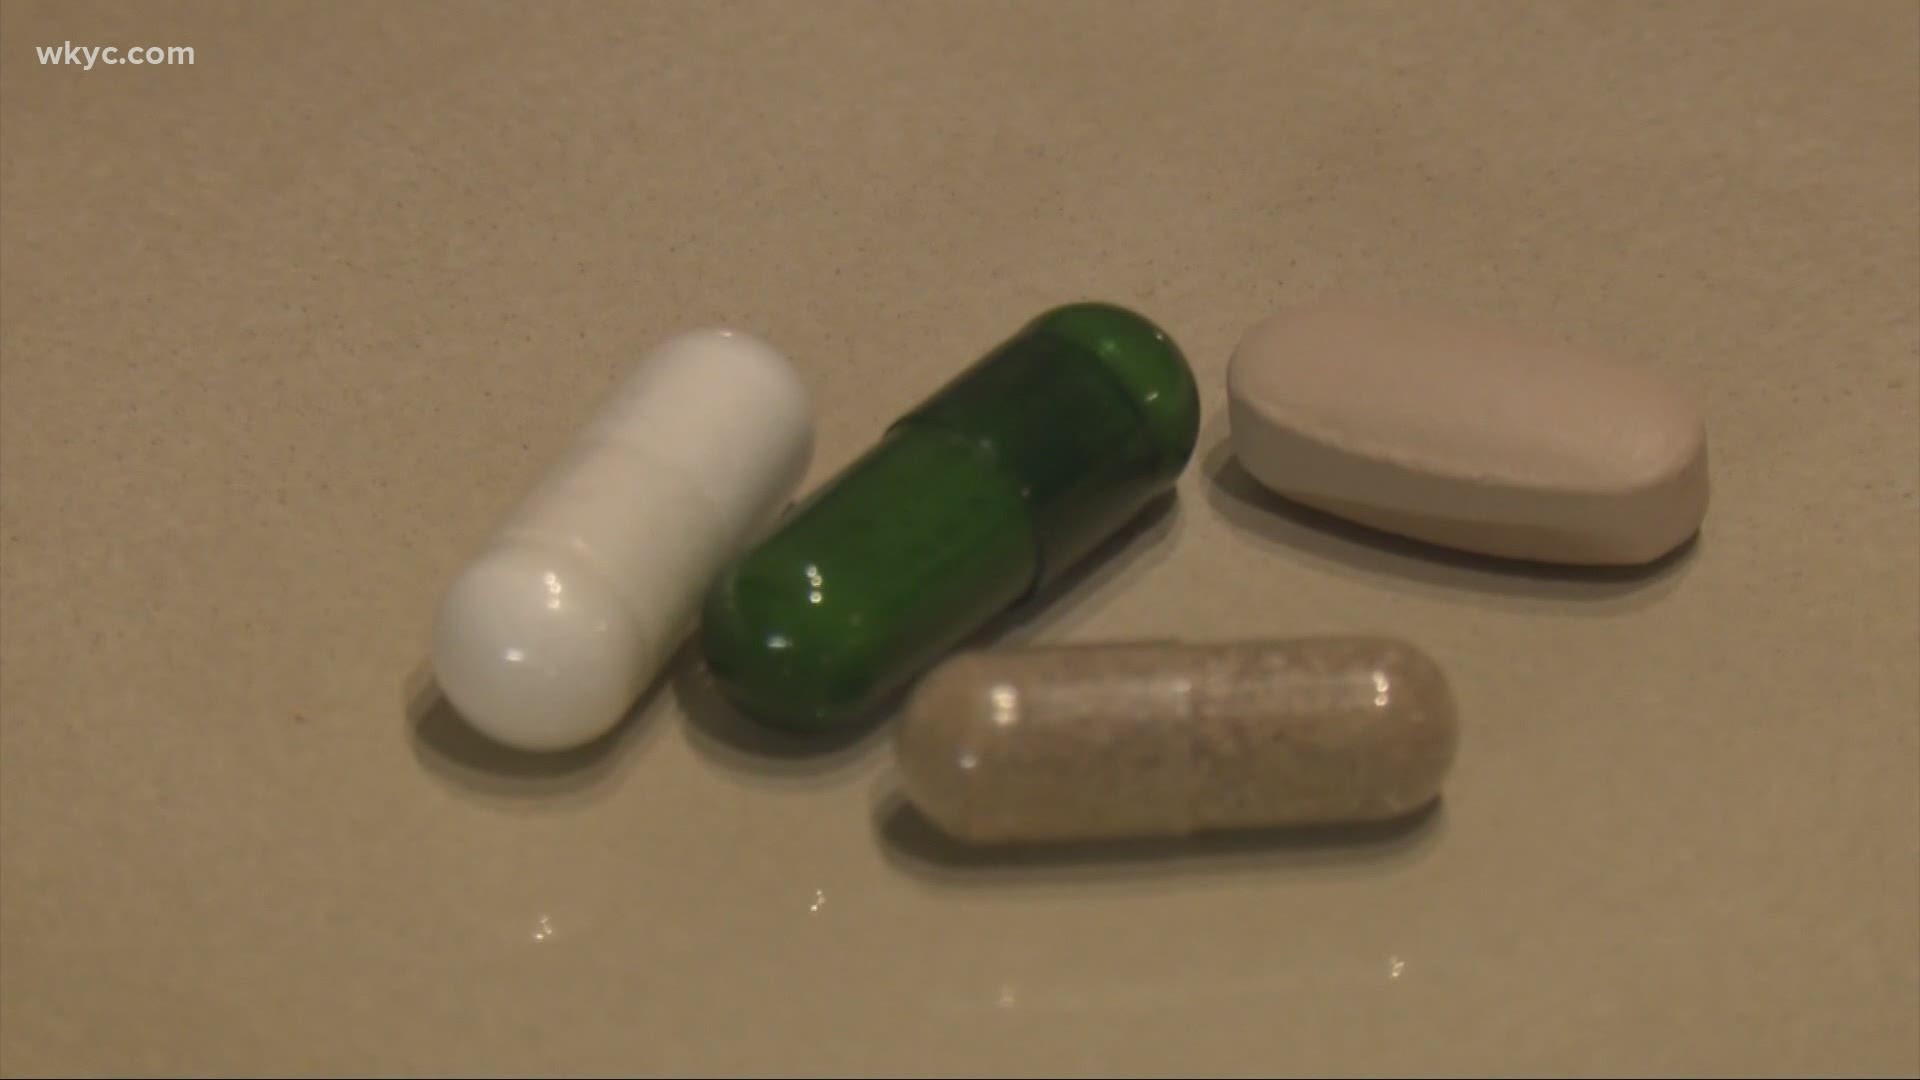 During this pandemic a lot of people have taken vitamins and supplements to boost their immune system. Monica Robins tells us if this is a risk or not.